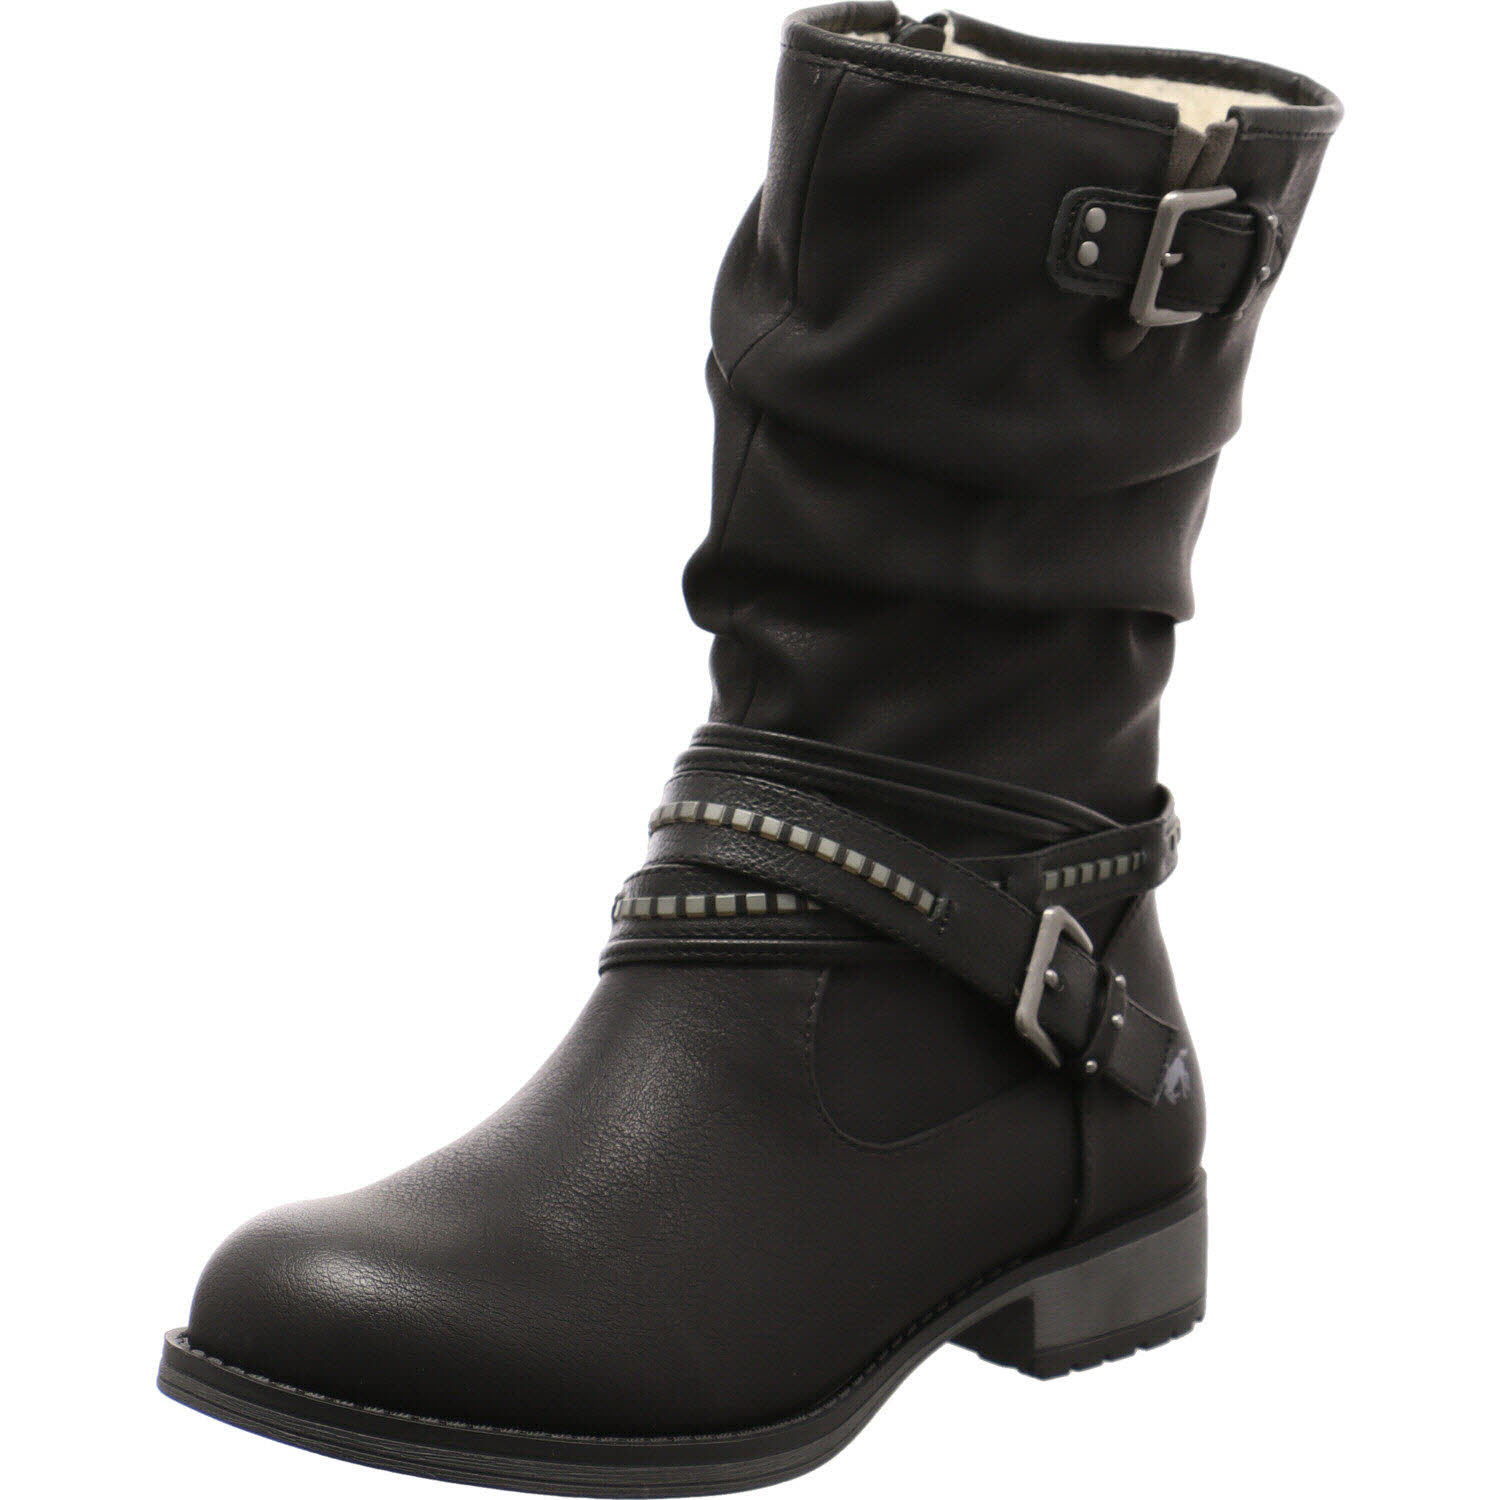 Mustang Stiefel